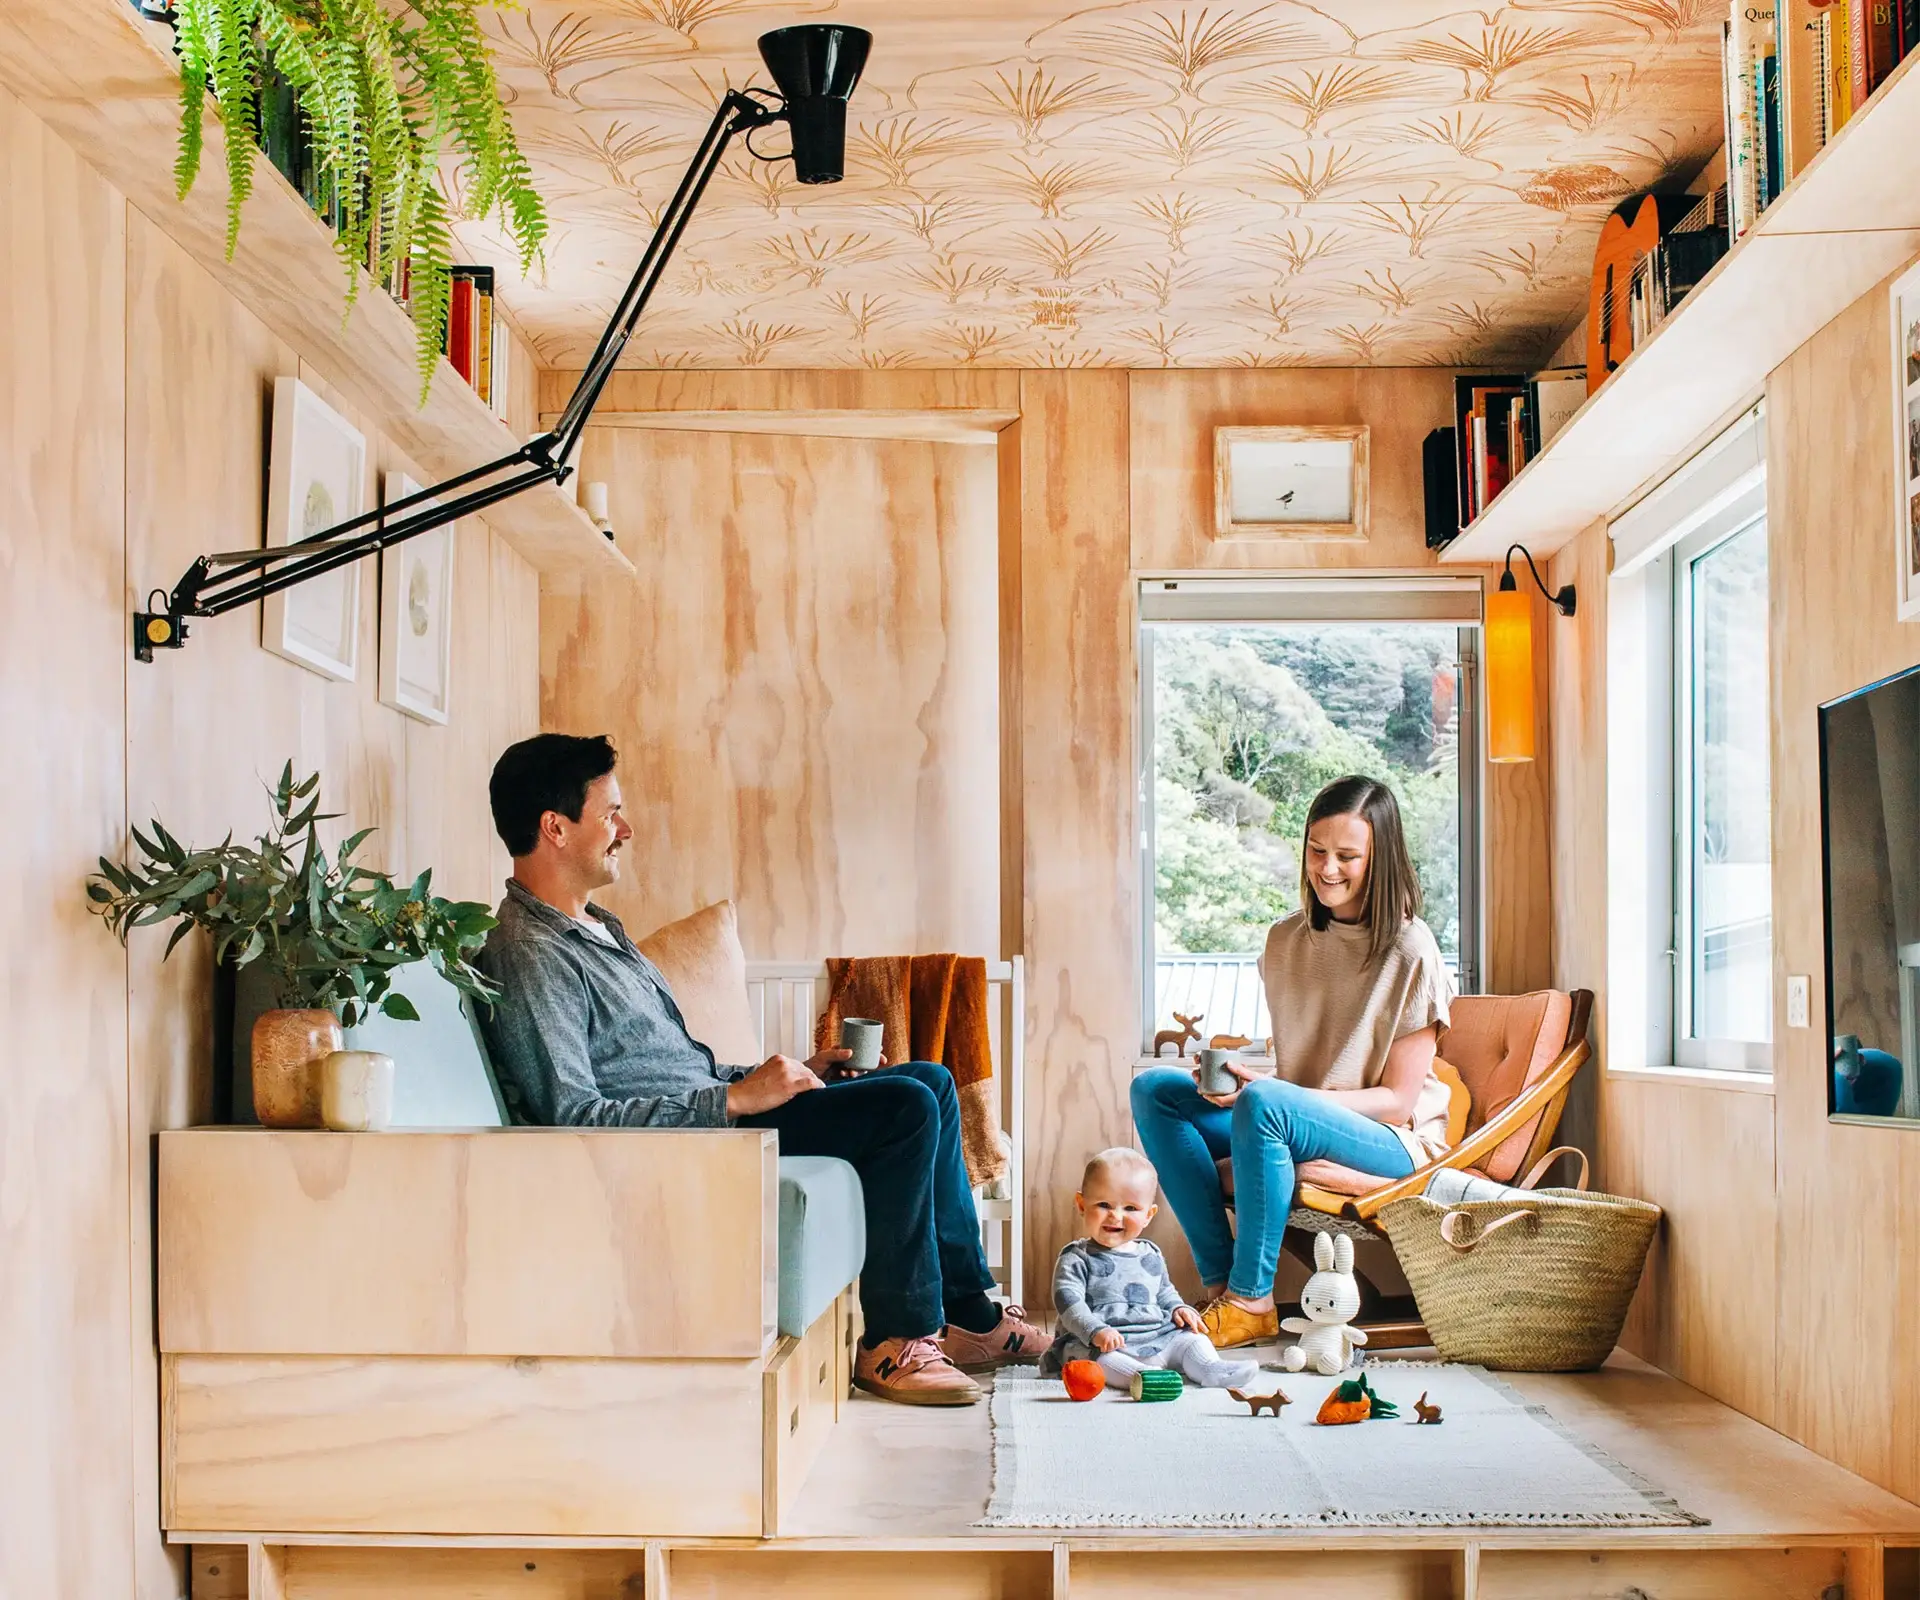 A man in a container home with his wife and daughter having some good time